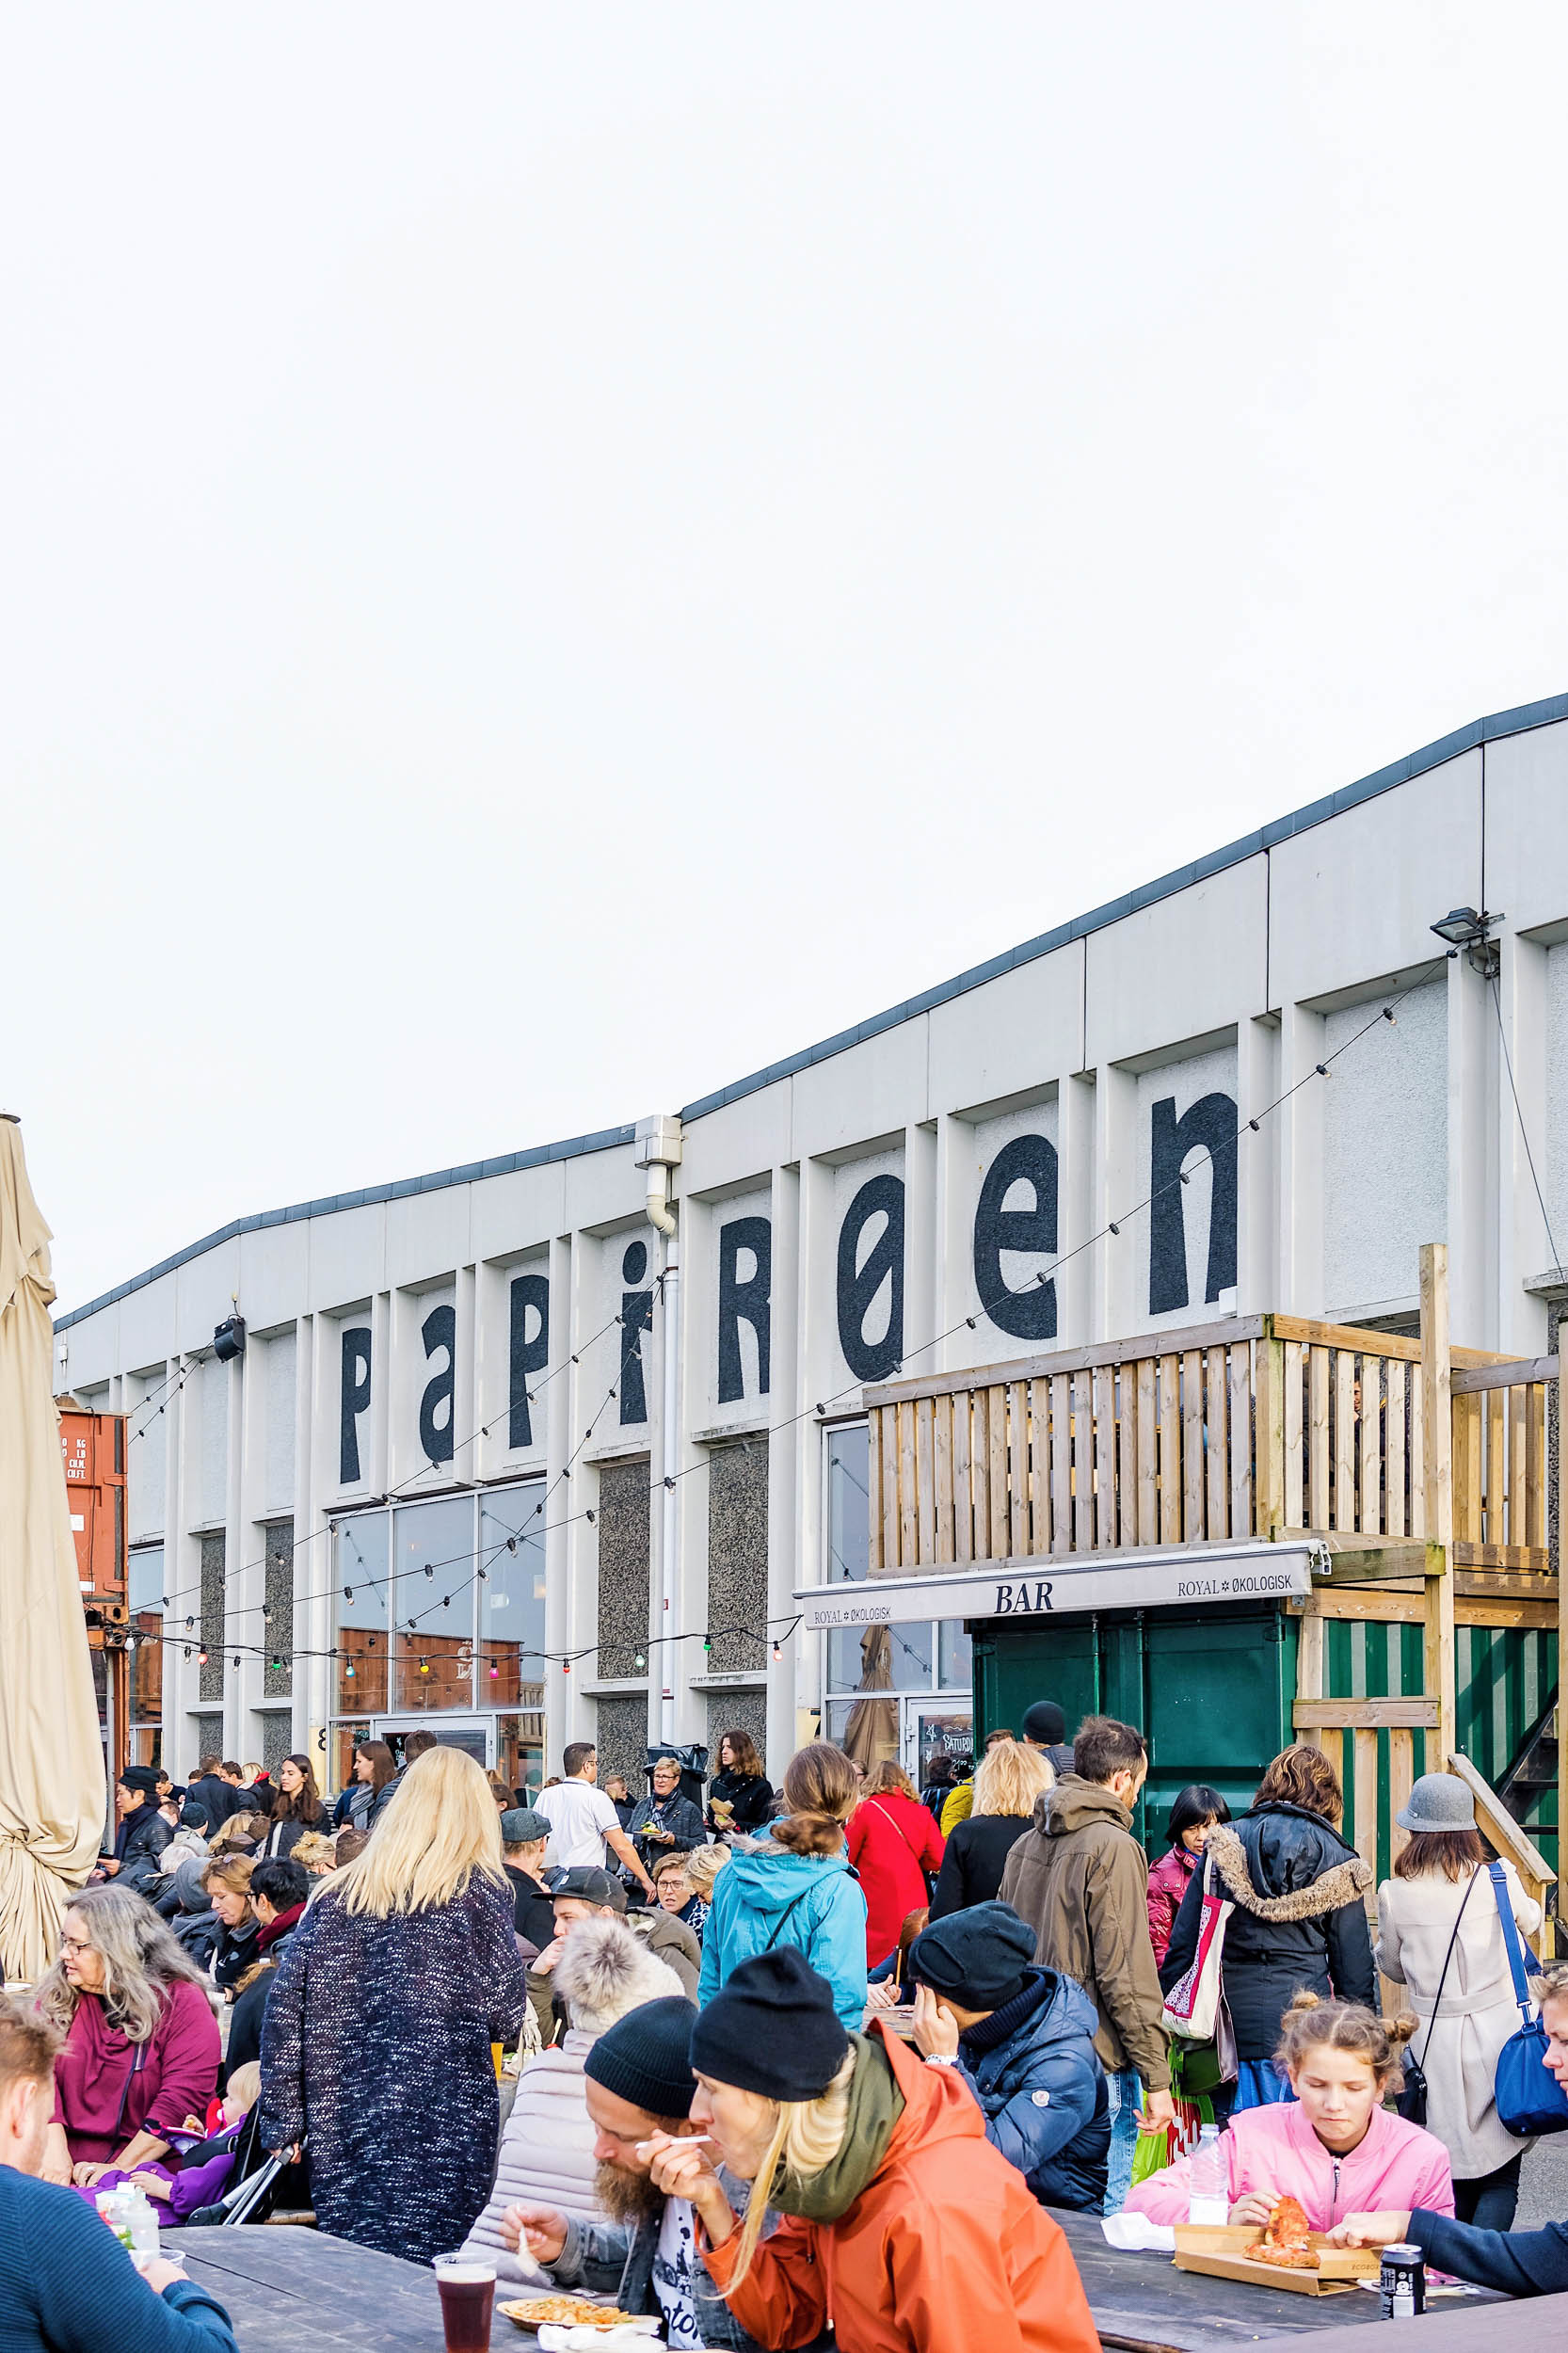 The Copenhagen street food market on Paper Island (Papirøen). A great place to grab lunch or dinner!